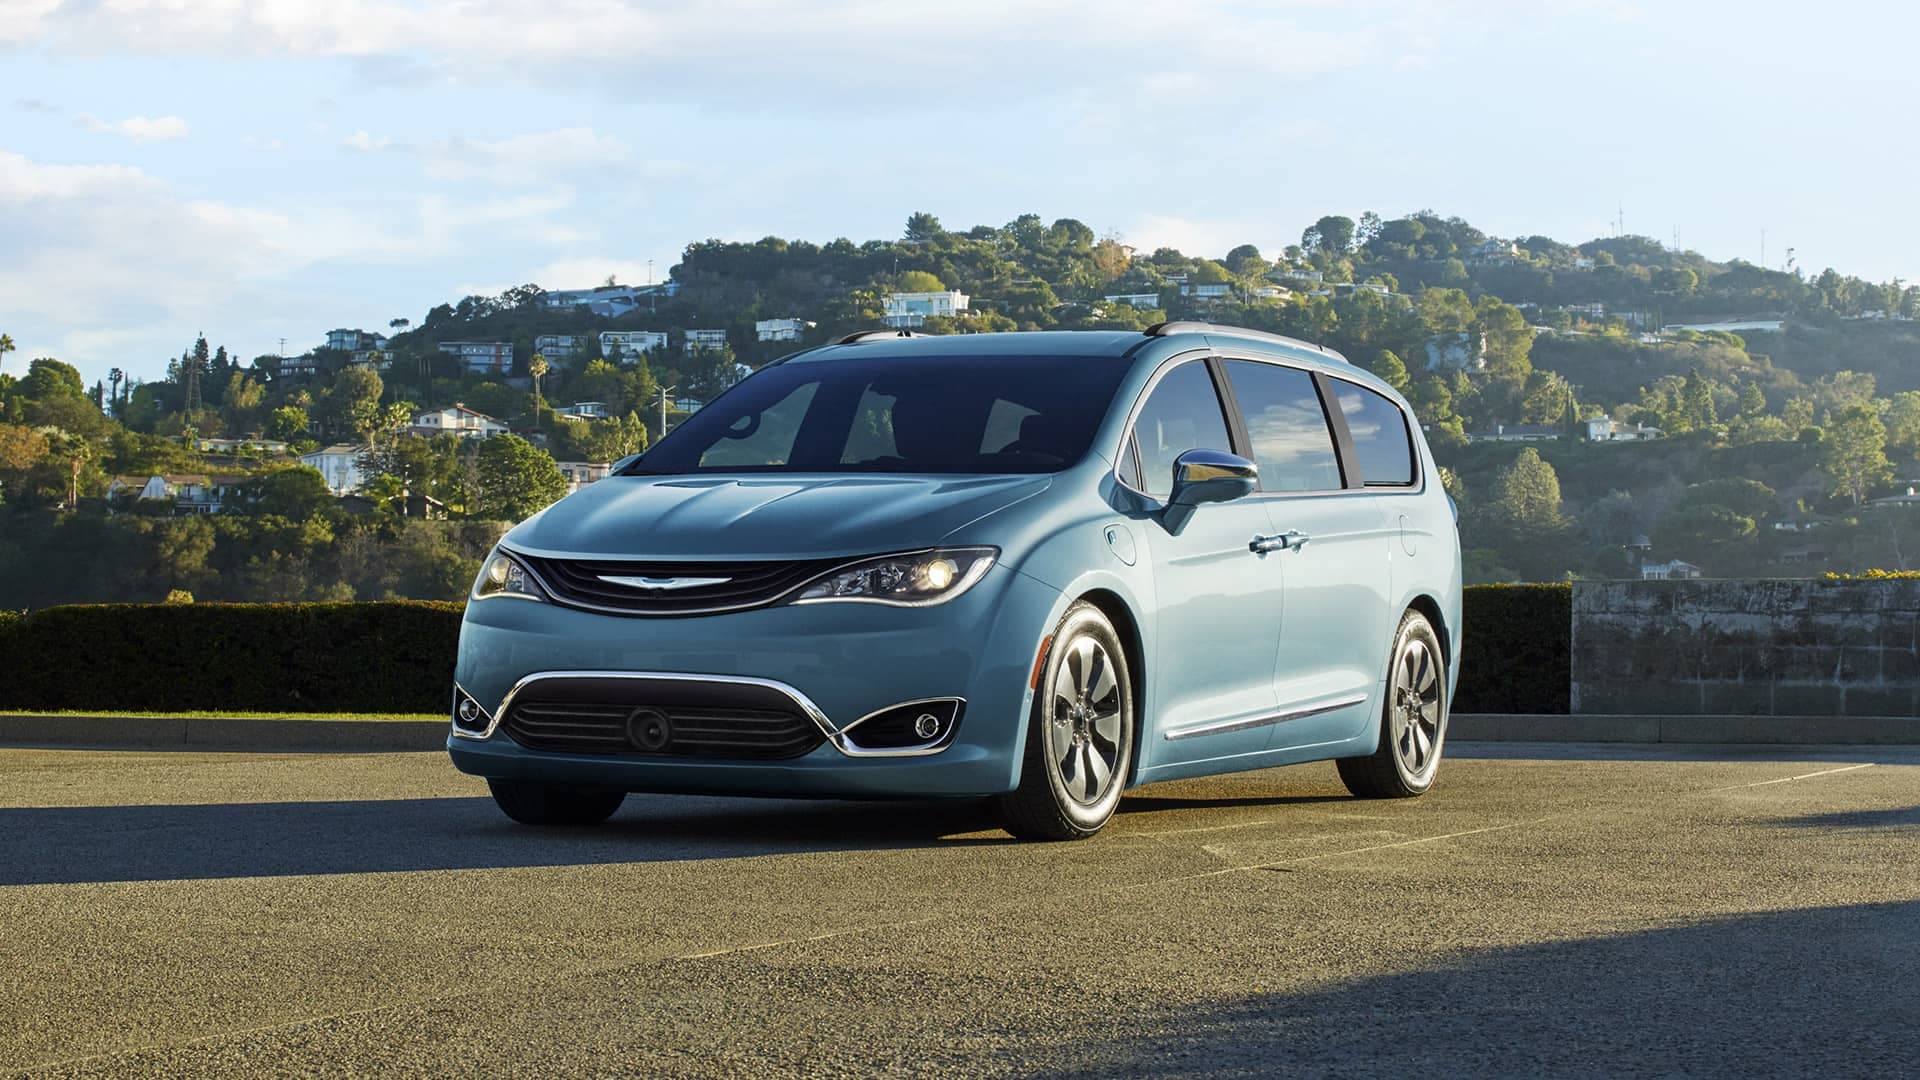 Fiat-Chrysler Won’t Be Calling the Pacifica Hybrid Minivan a ‘Plug-In’ to Avoid Confusion